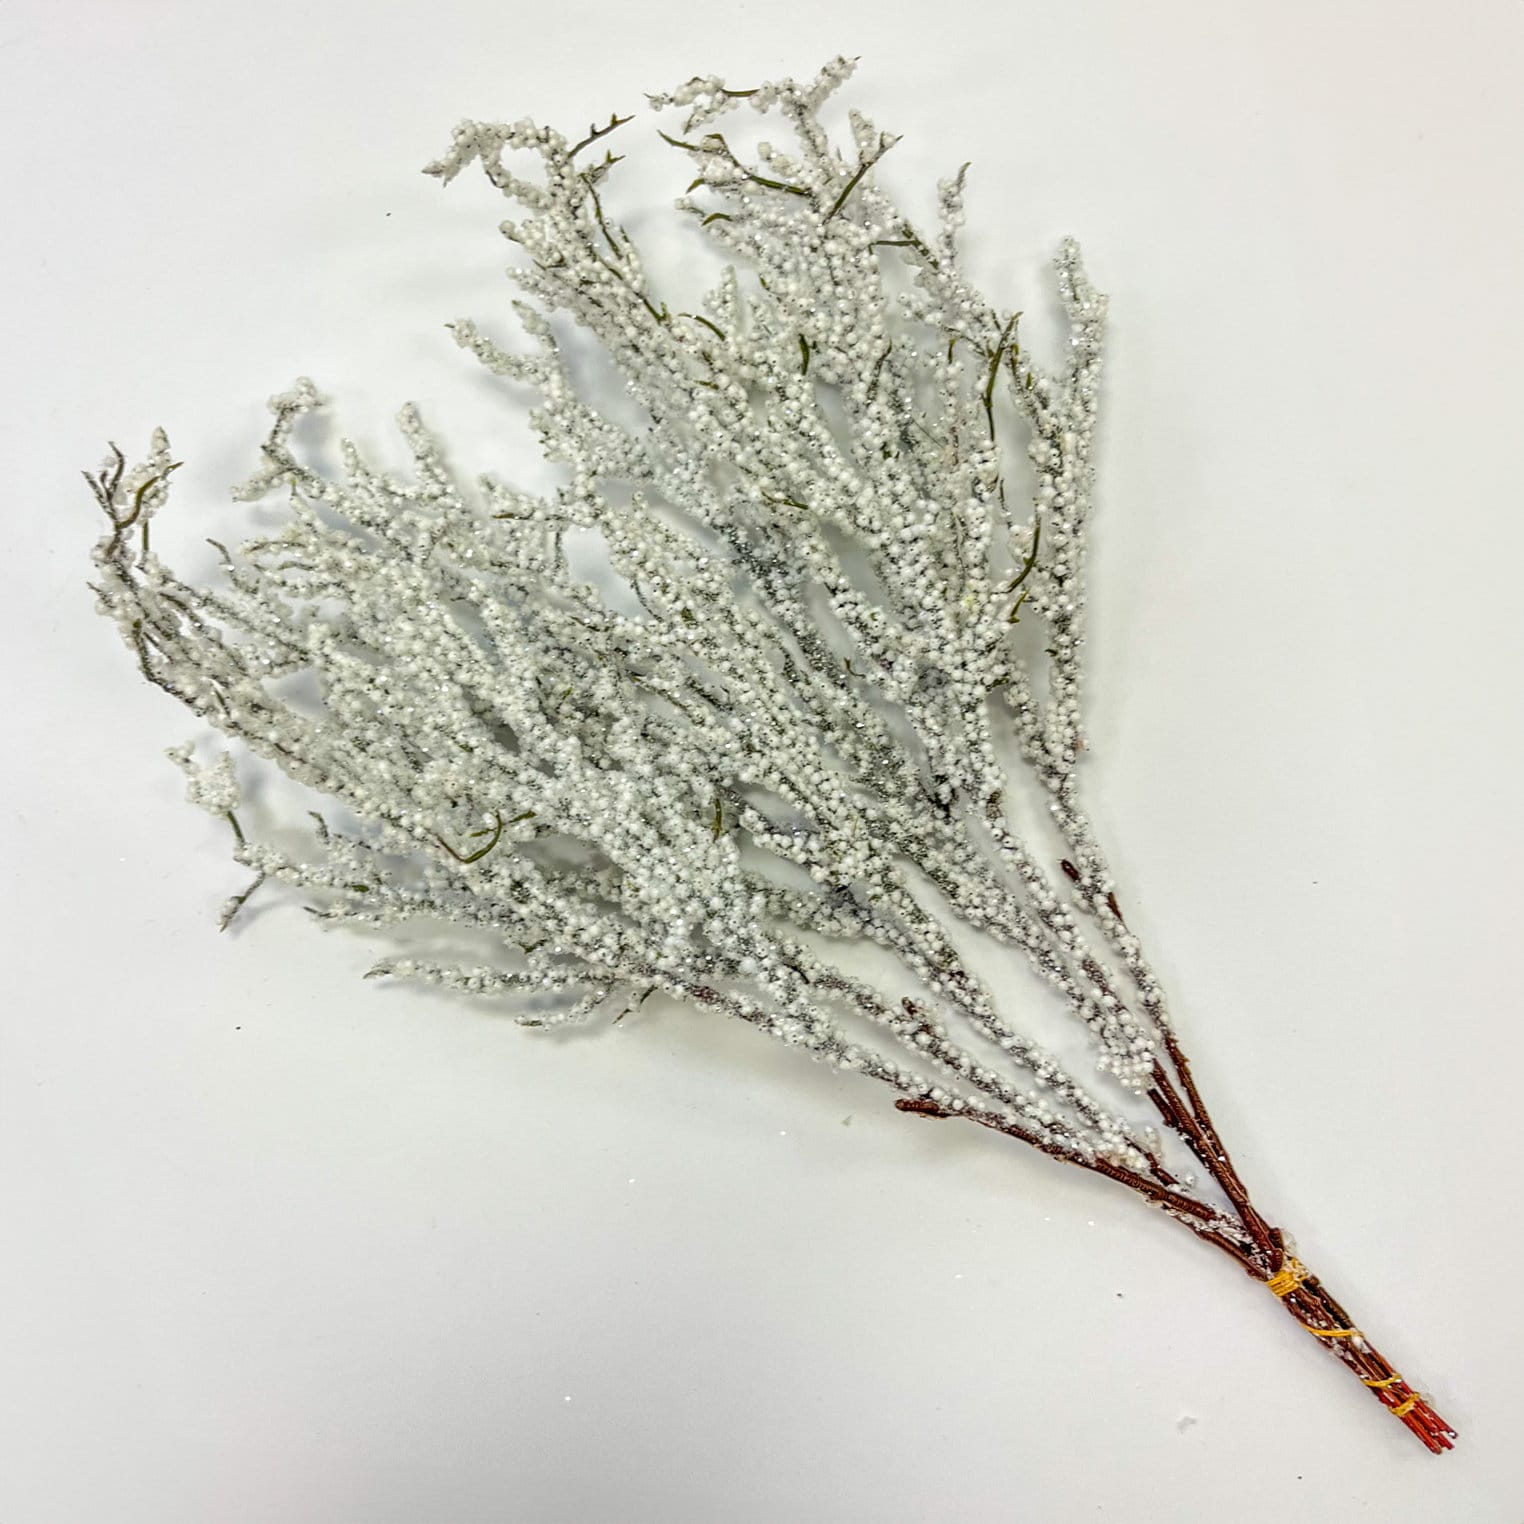 Christmas Floral Arrangement, Winter Centerpiece, Glitter Branches, Faux  Branches for Vase, Winter Branches, Christmas Picks, Twig Tree 